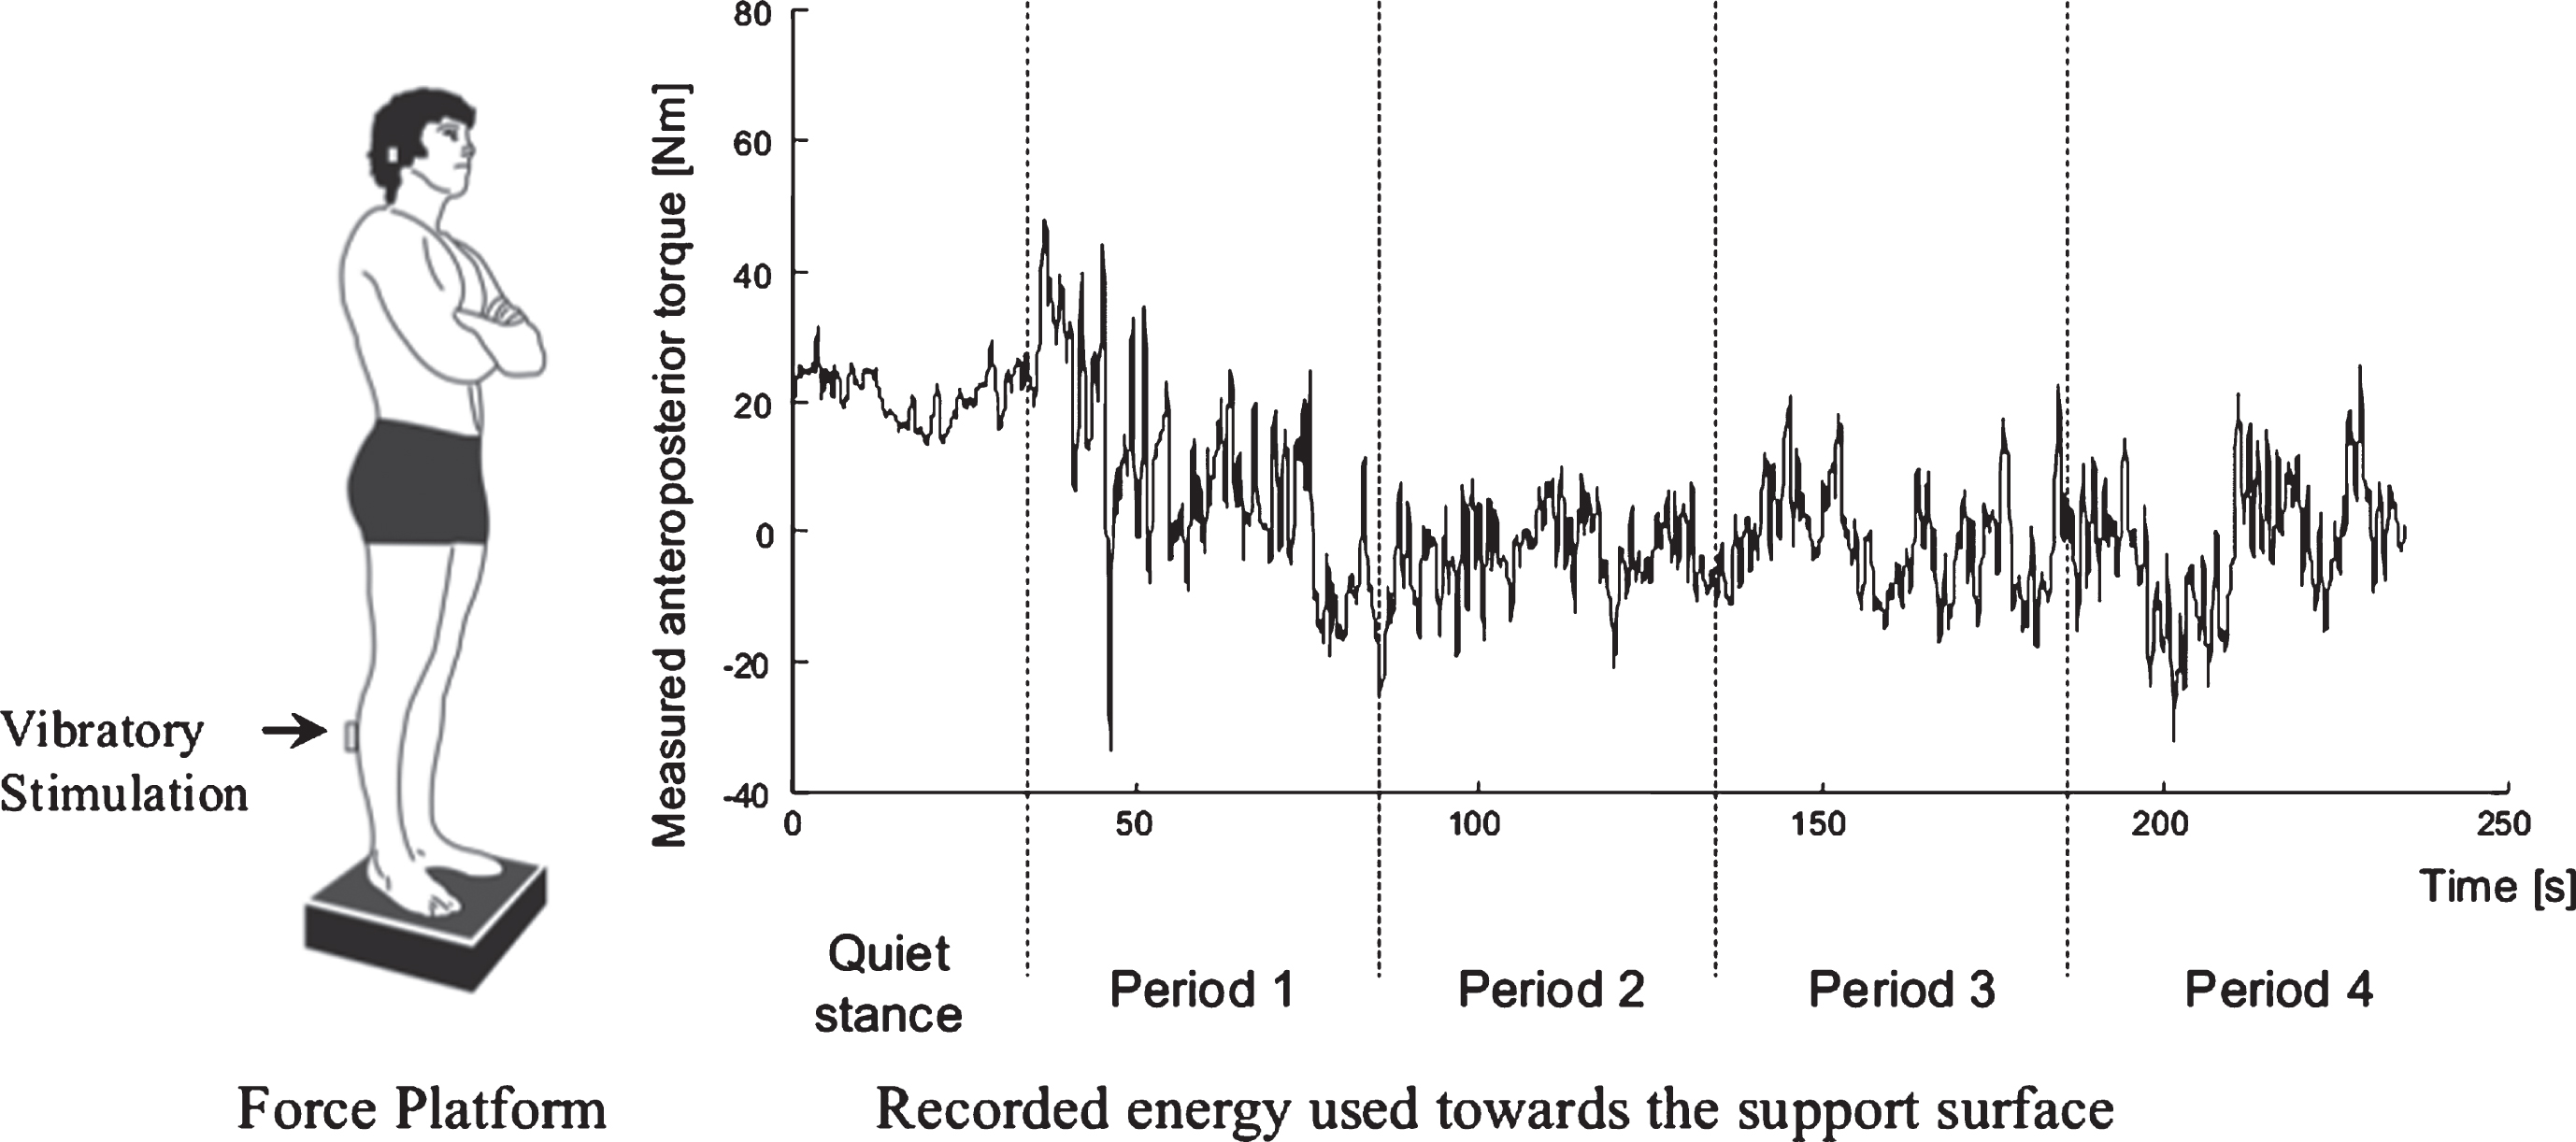 Posturography test. Division of each recorded test into quiet stance and 4 perturbation periods. Each test lasted for 230 seconds, with an initial 30 s recording of quiet stance before any perturbing stimulus was applied, and subsequent 200 s of perturbing stimuli. The perturbation periods were split into four periods during the stimulation (30–80, 80–130, 130–180, and 180–230 seconds, respectively). Each of the perturbation periods contained the same amplitude and duration of perturbing stimulus.